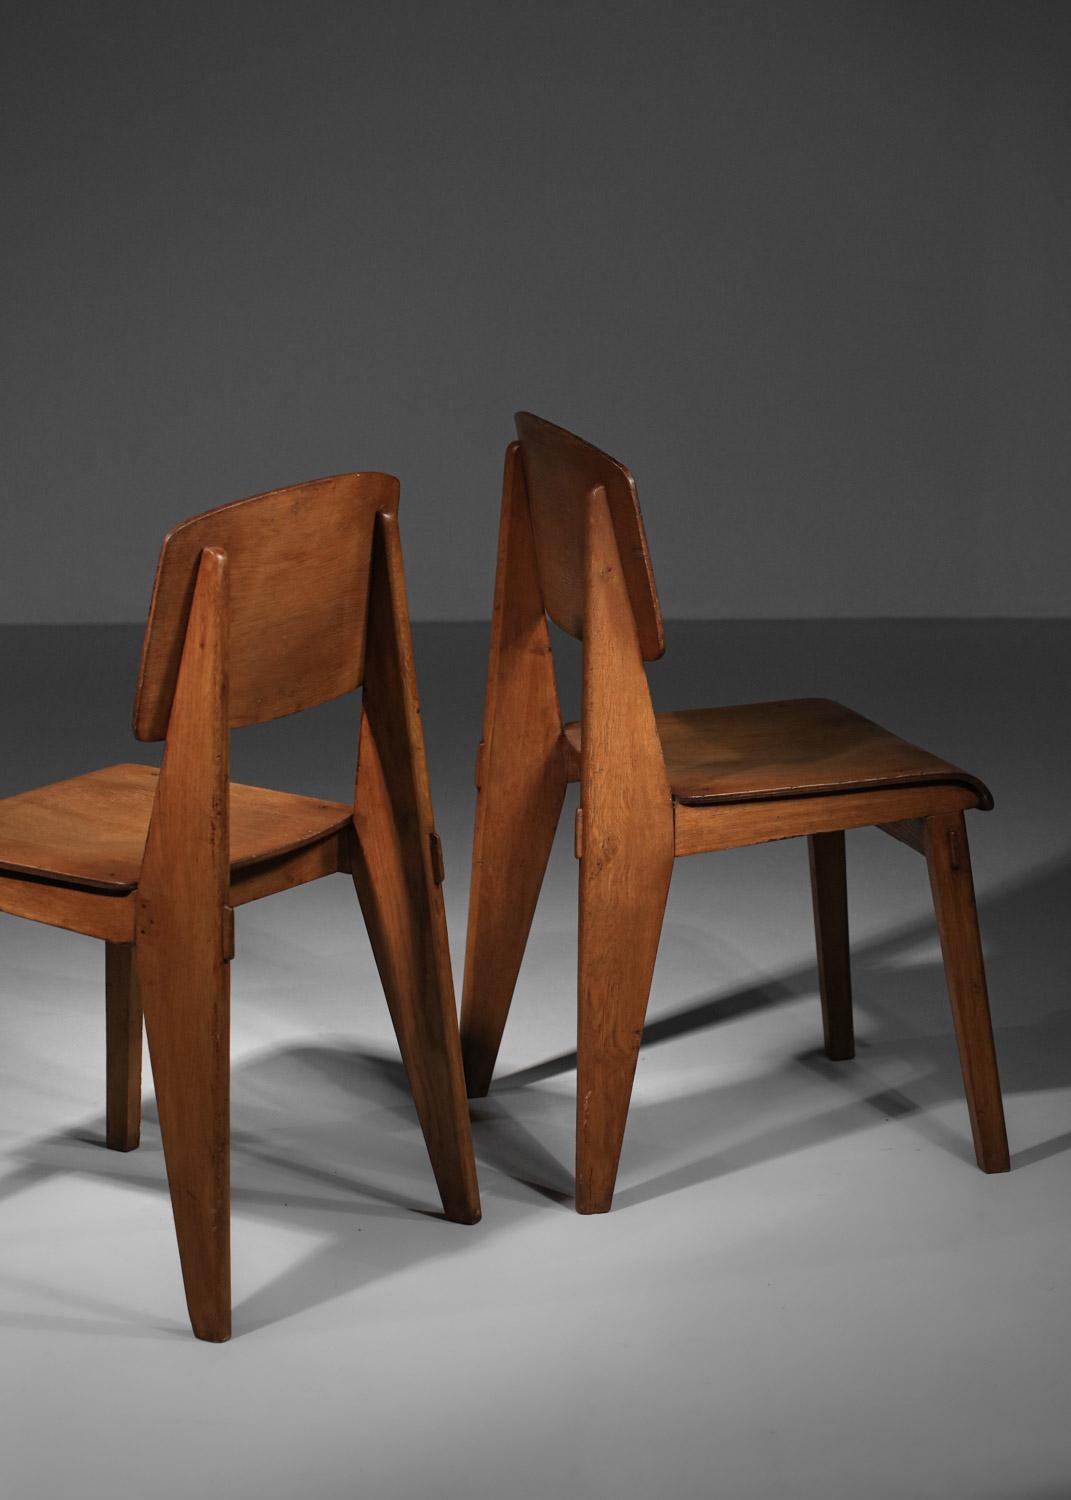 rare Pair of Jean Prouvé all-wood chairs 1950's French design  For Sale 6